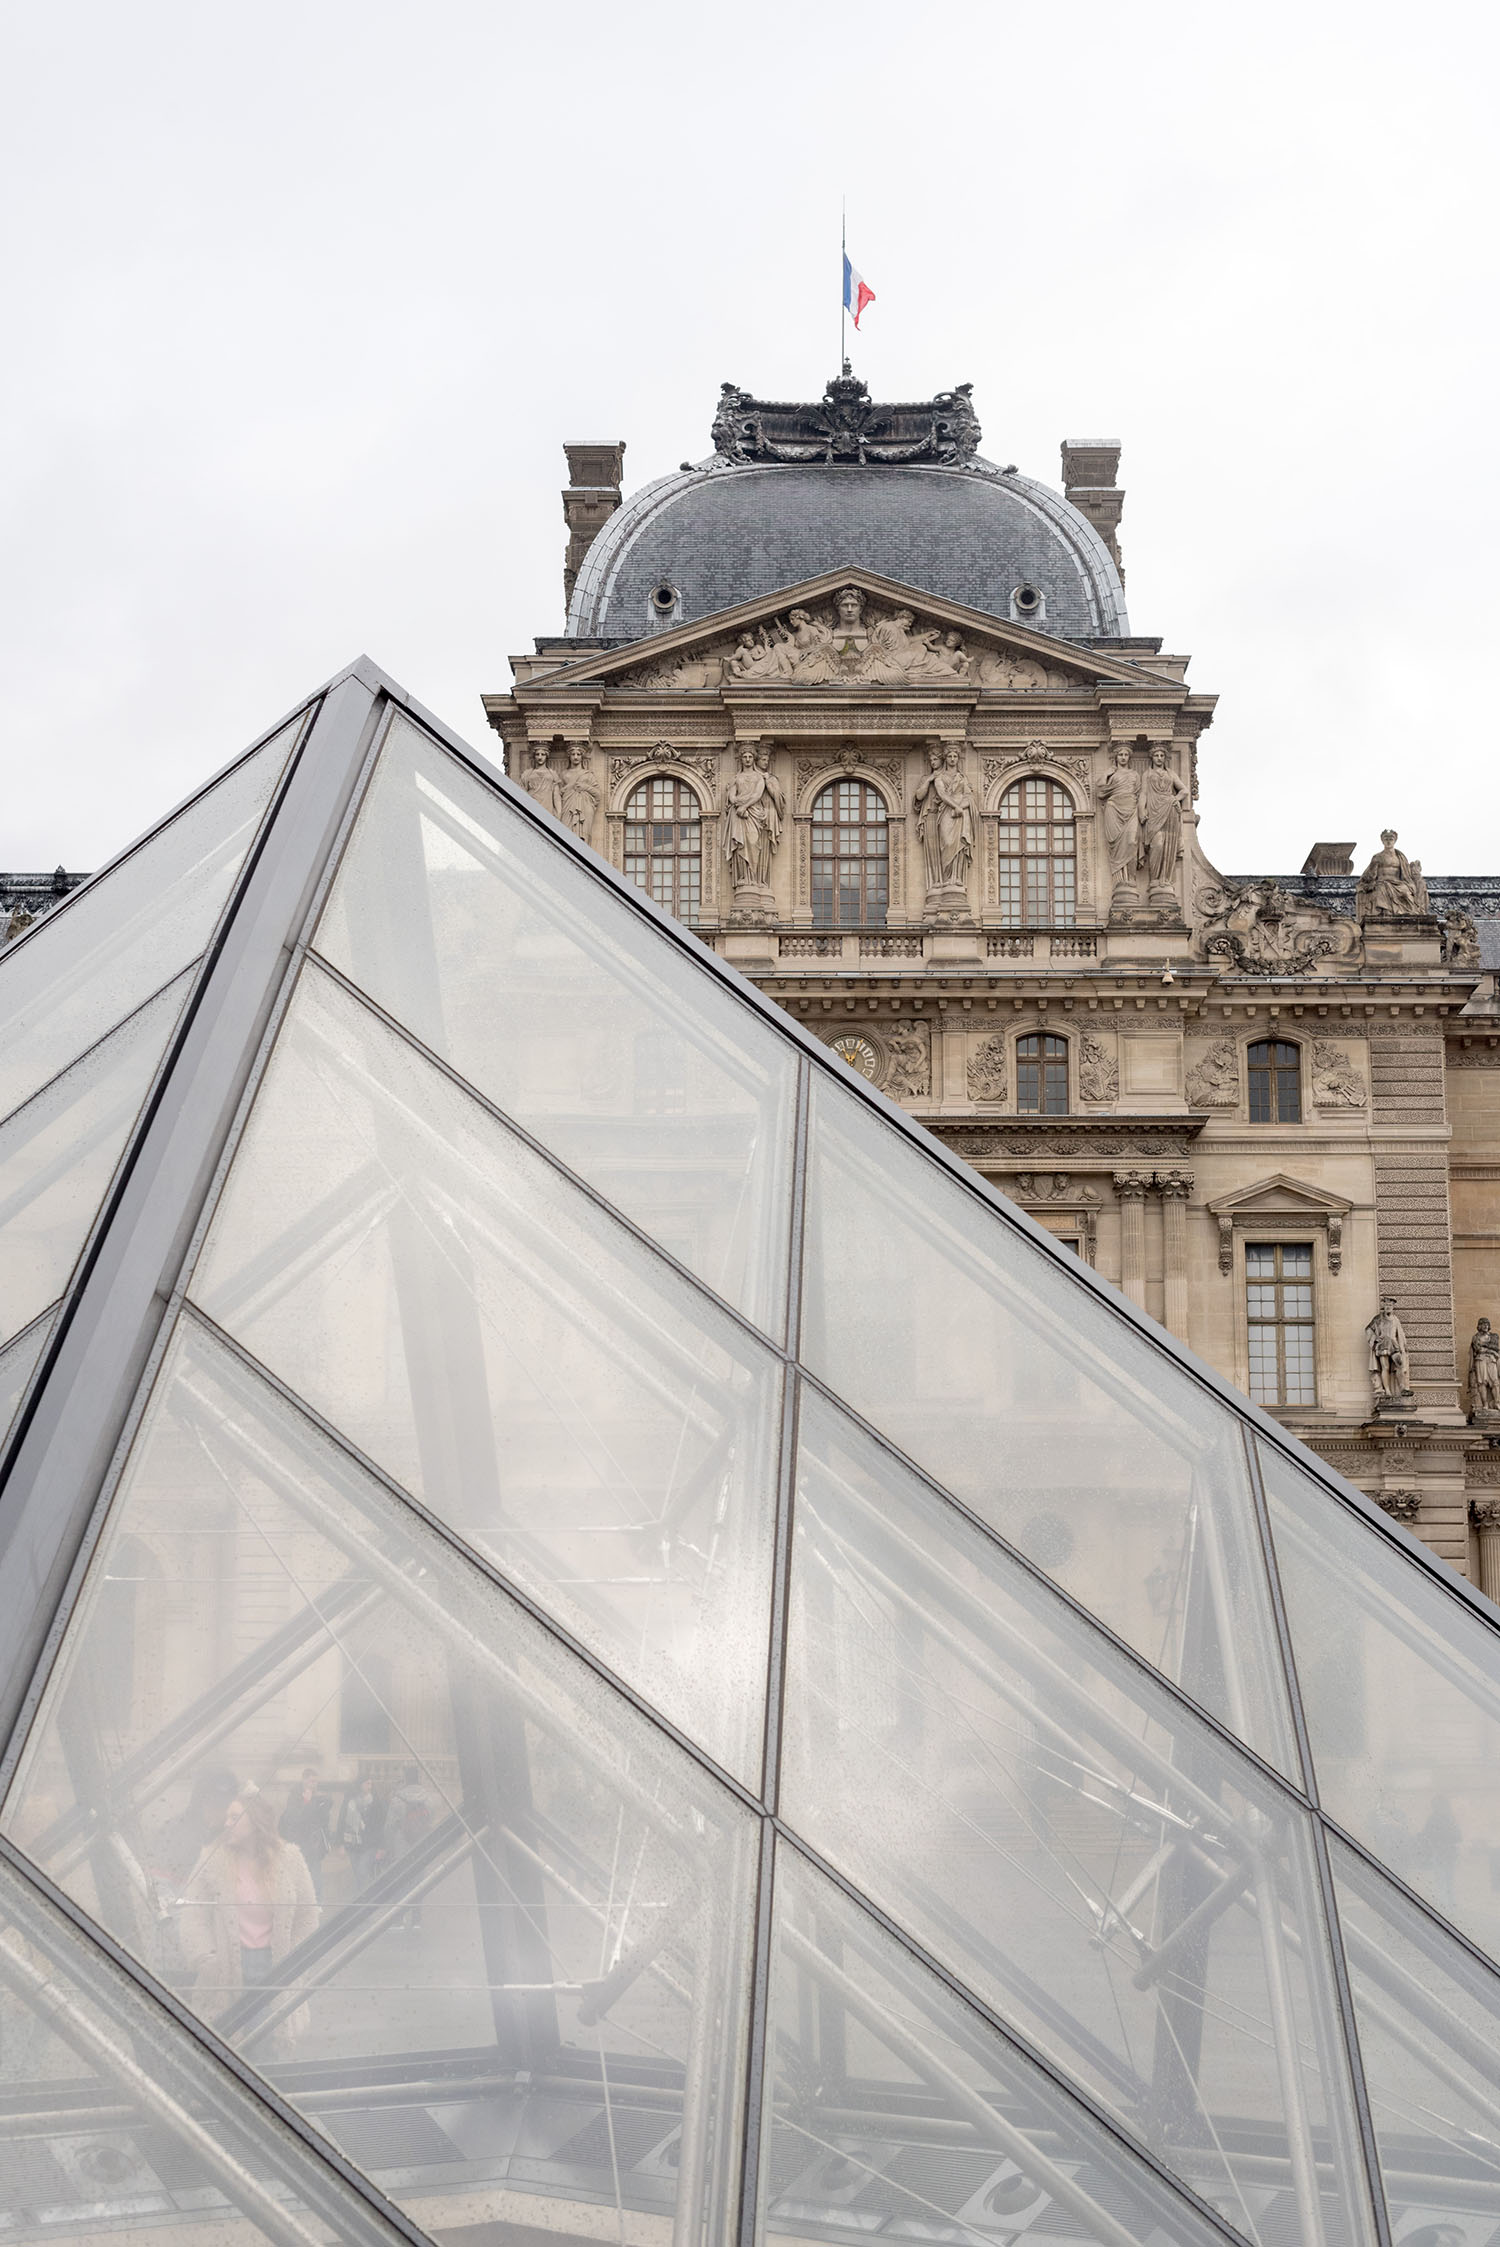 The Palais du Louvre and pyramide, as captured by top Canadian travel blogger Cee Fardoe of Coco & Vera